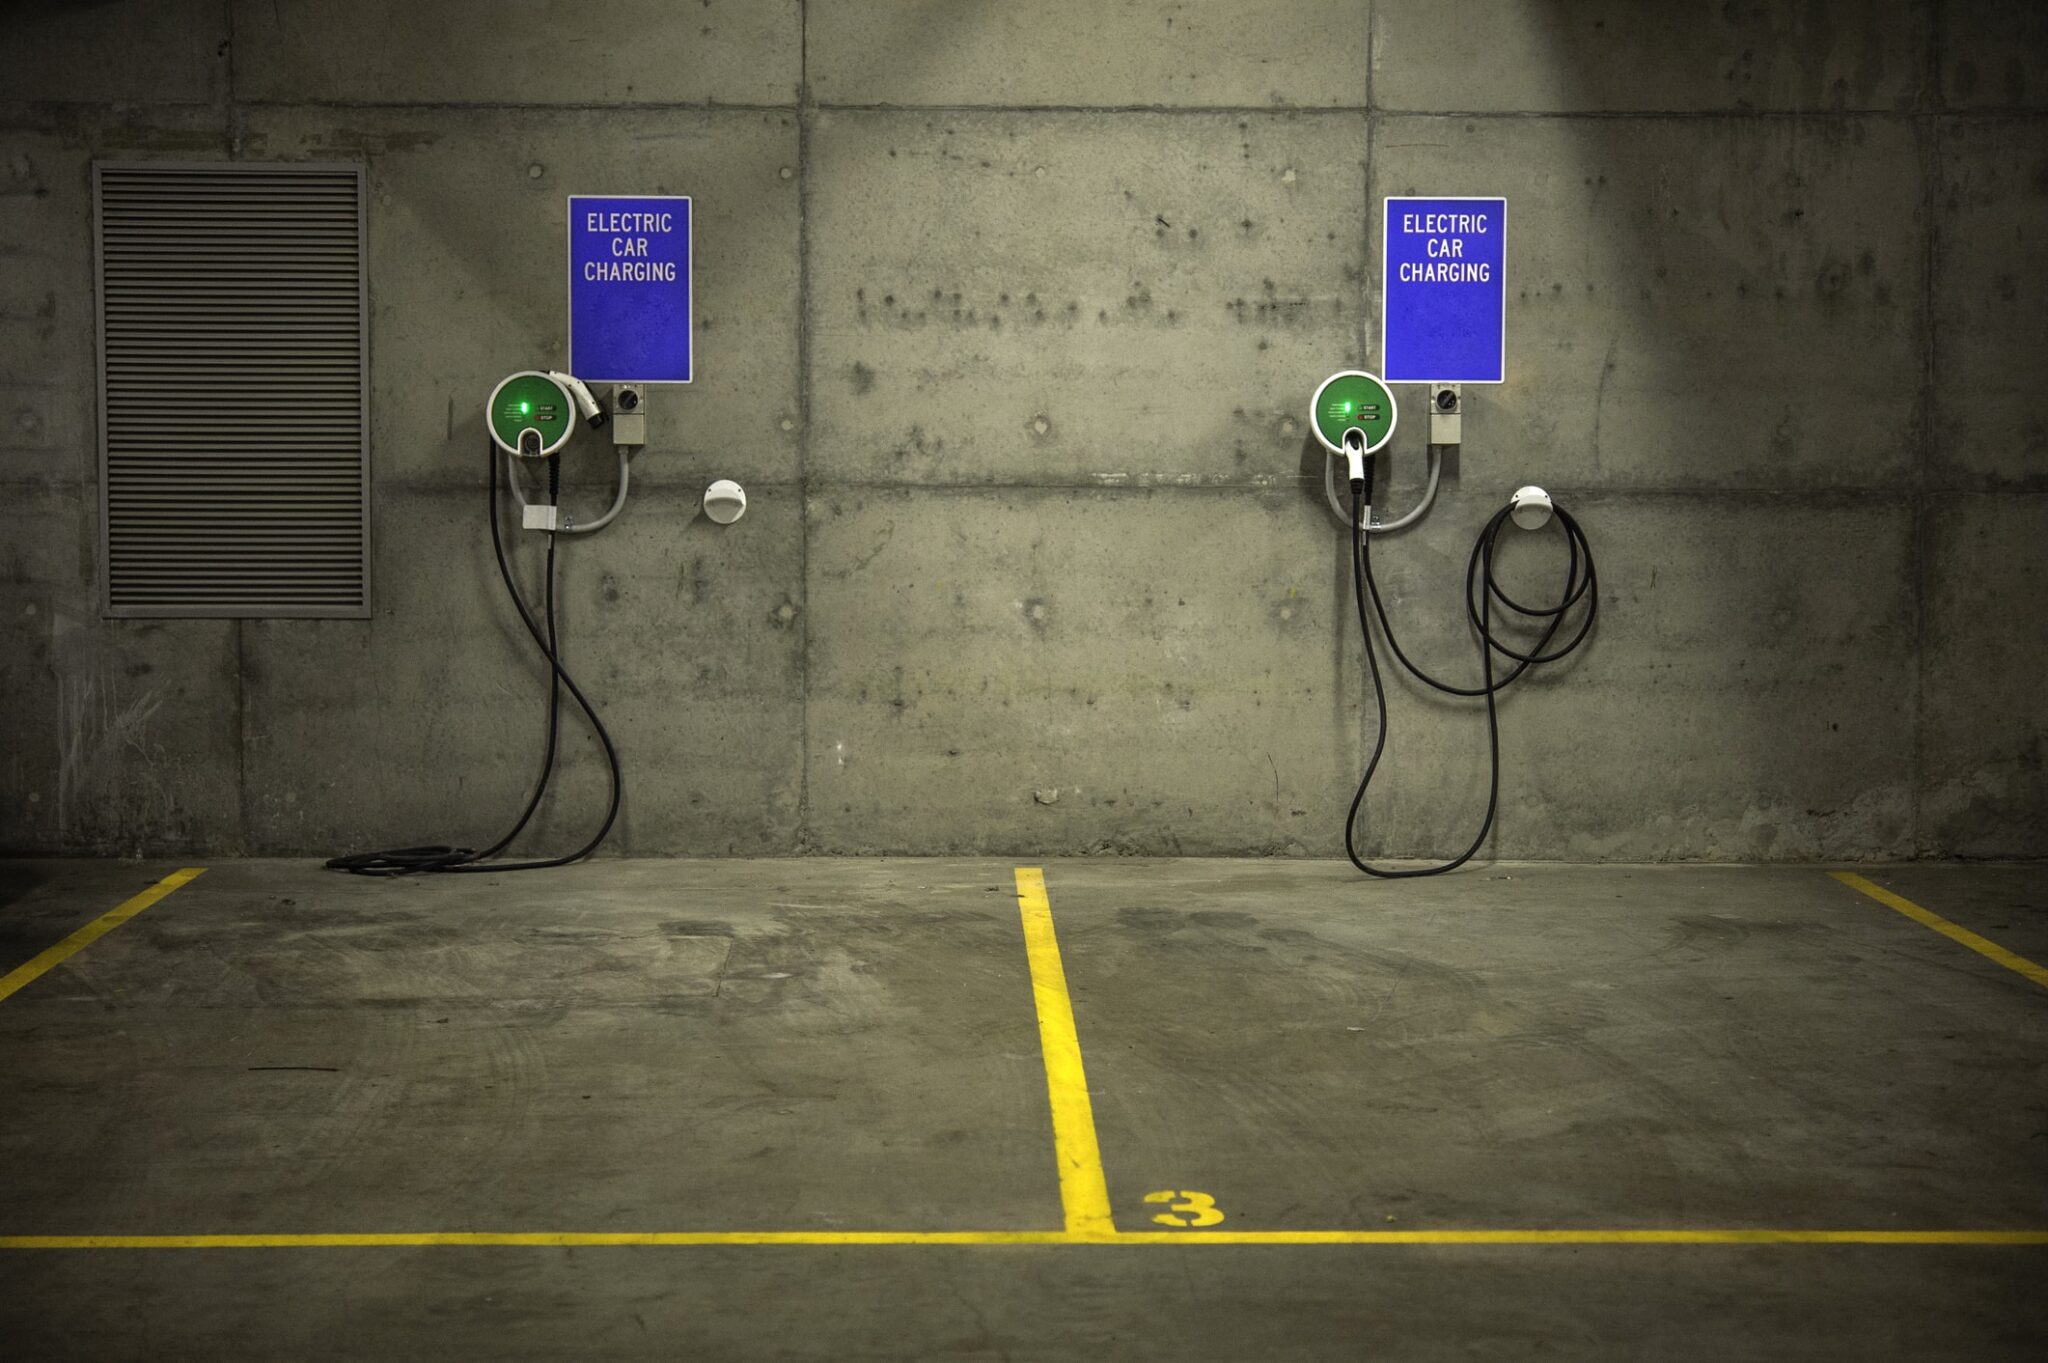 When planning the design of a parking garage, it is essential to consider EV charging stations. By incorporating two electric car charging stations, the garage can cater to the growing demand for environmentally friendly transportation